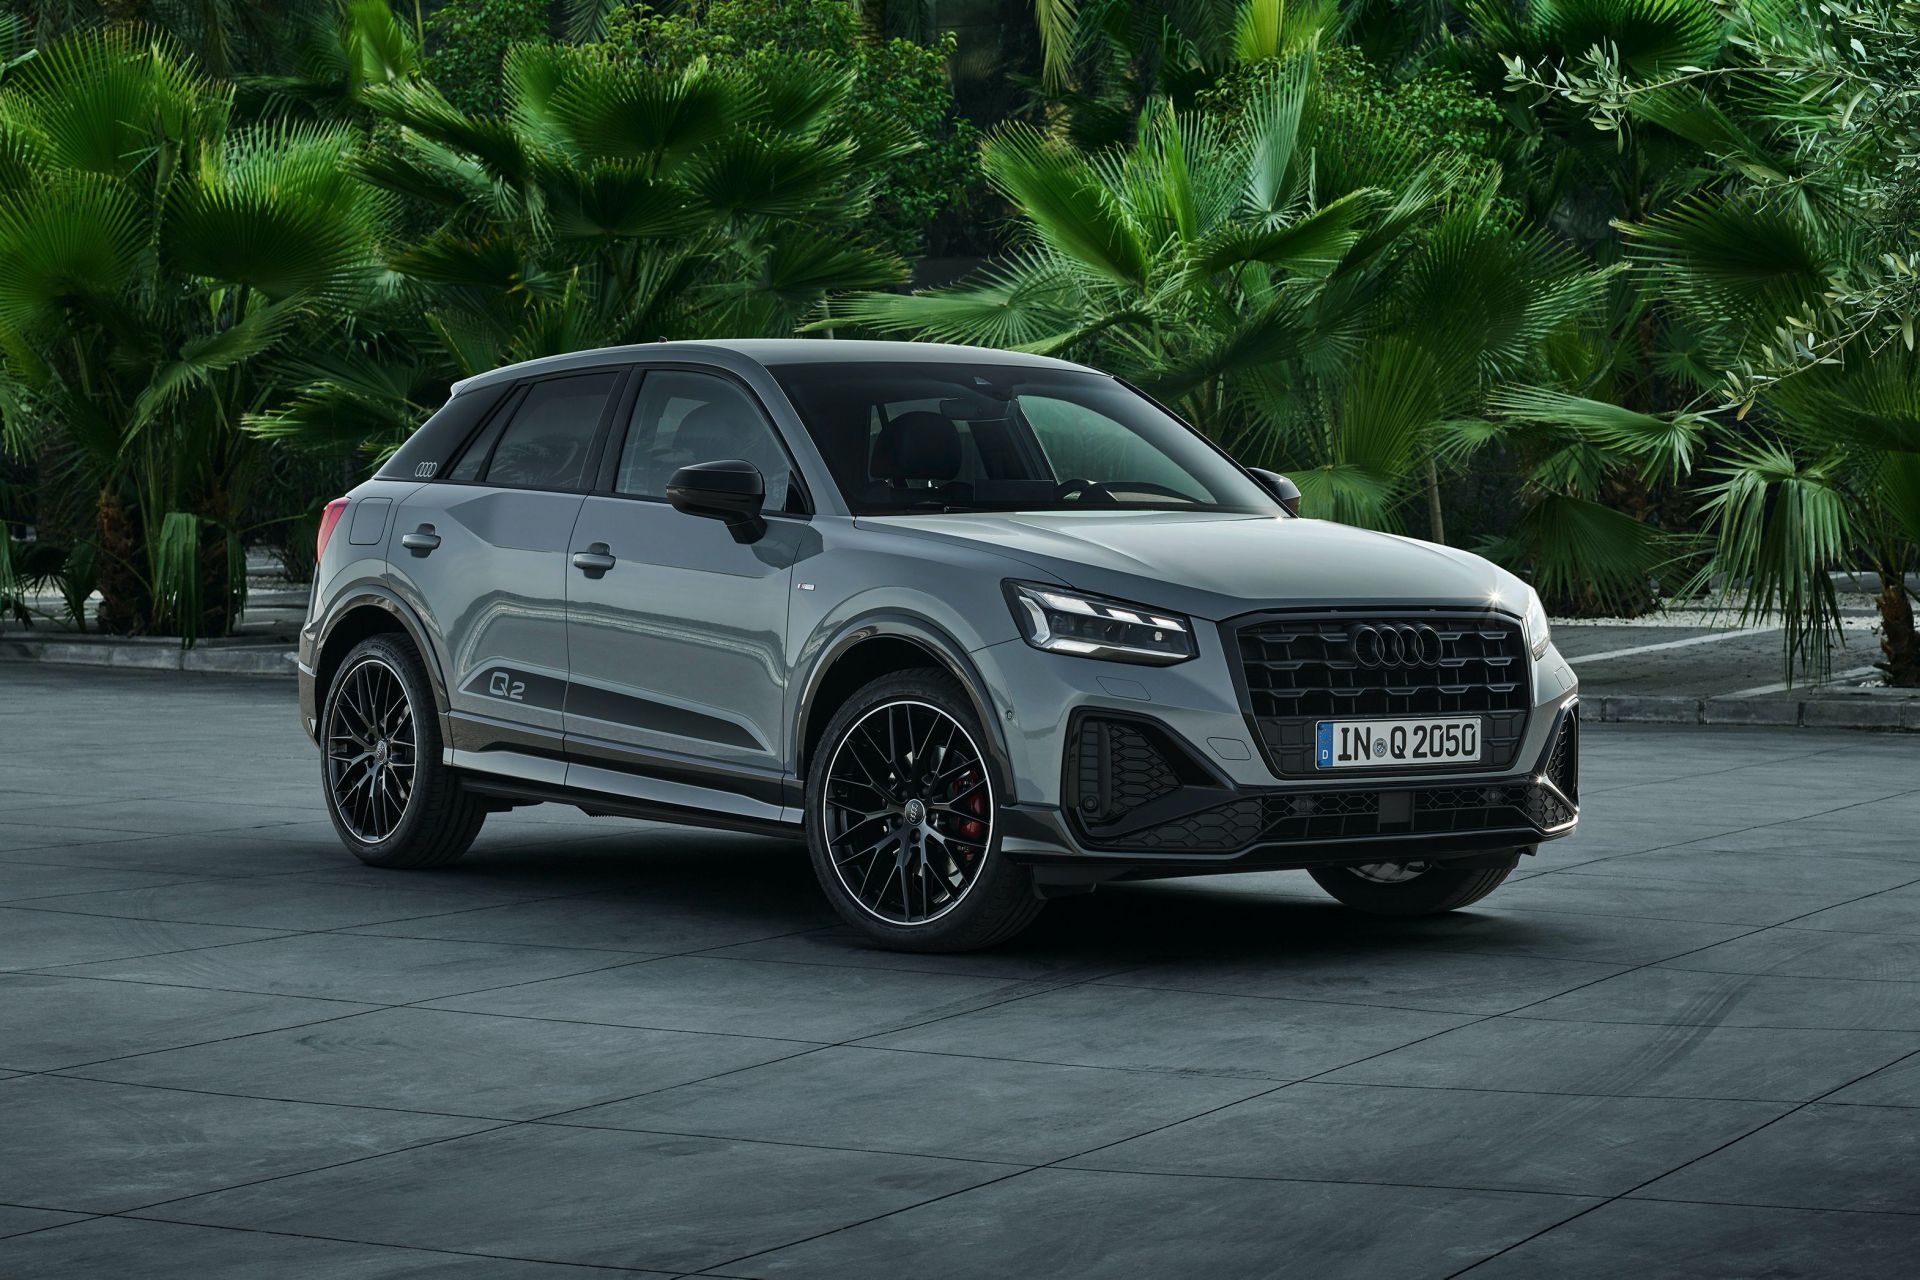 2021 Audi Q2 Introduces Subtle Styling Updates, New Tech For Its